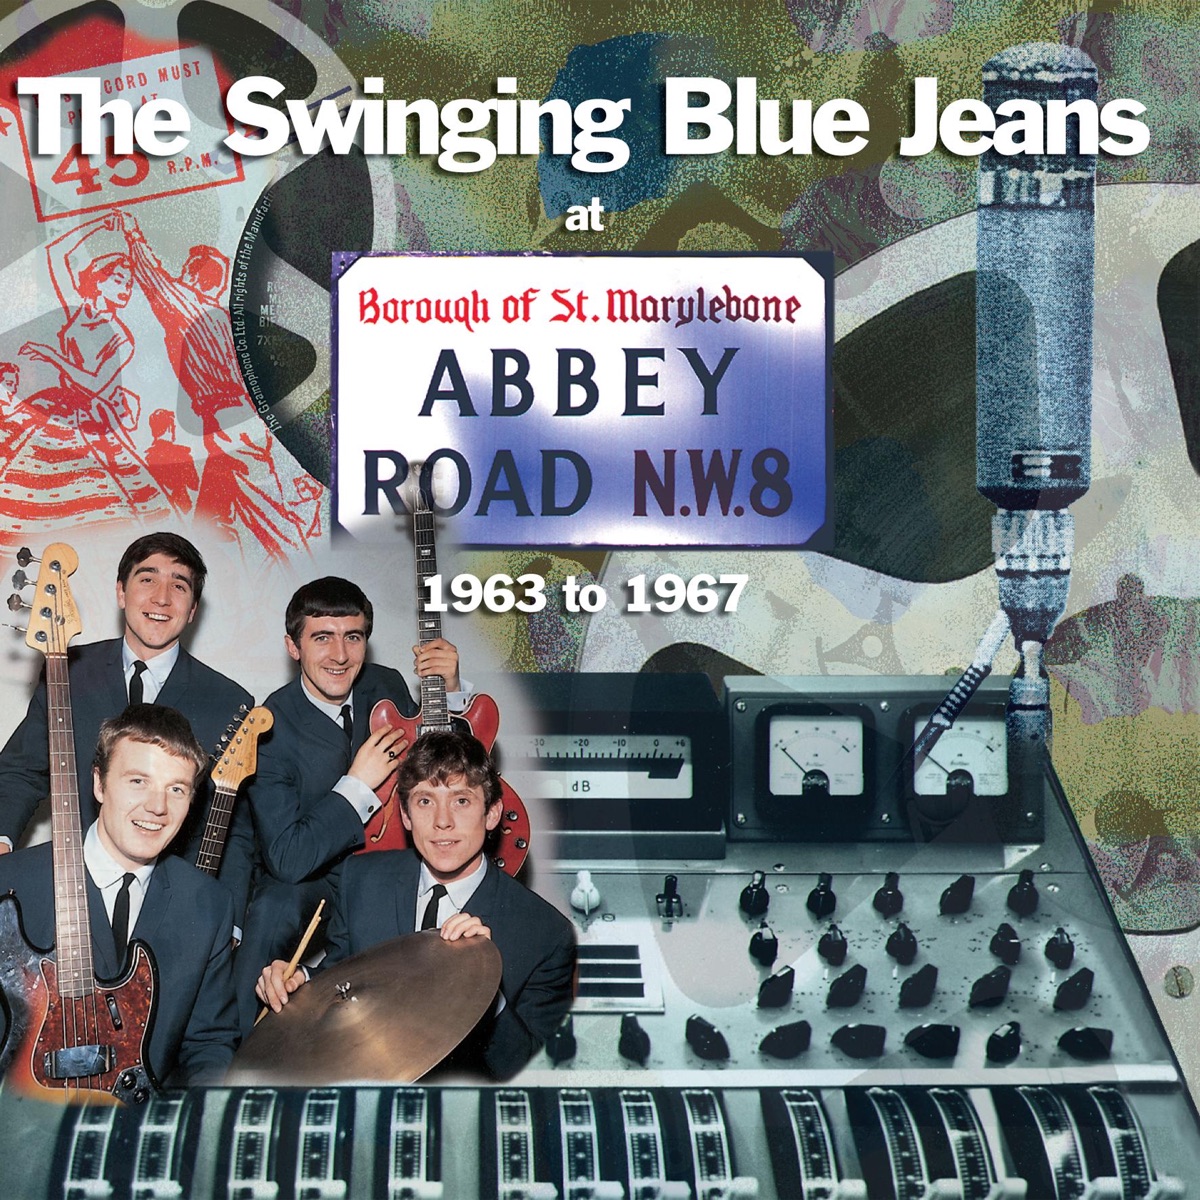 25 Greatest Hits by The Swinging Blue Jeans on Apple Music